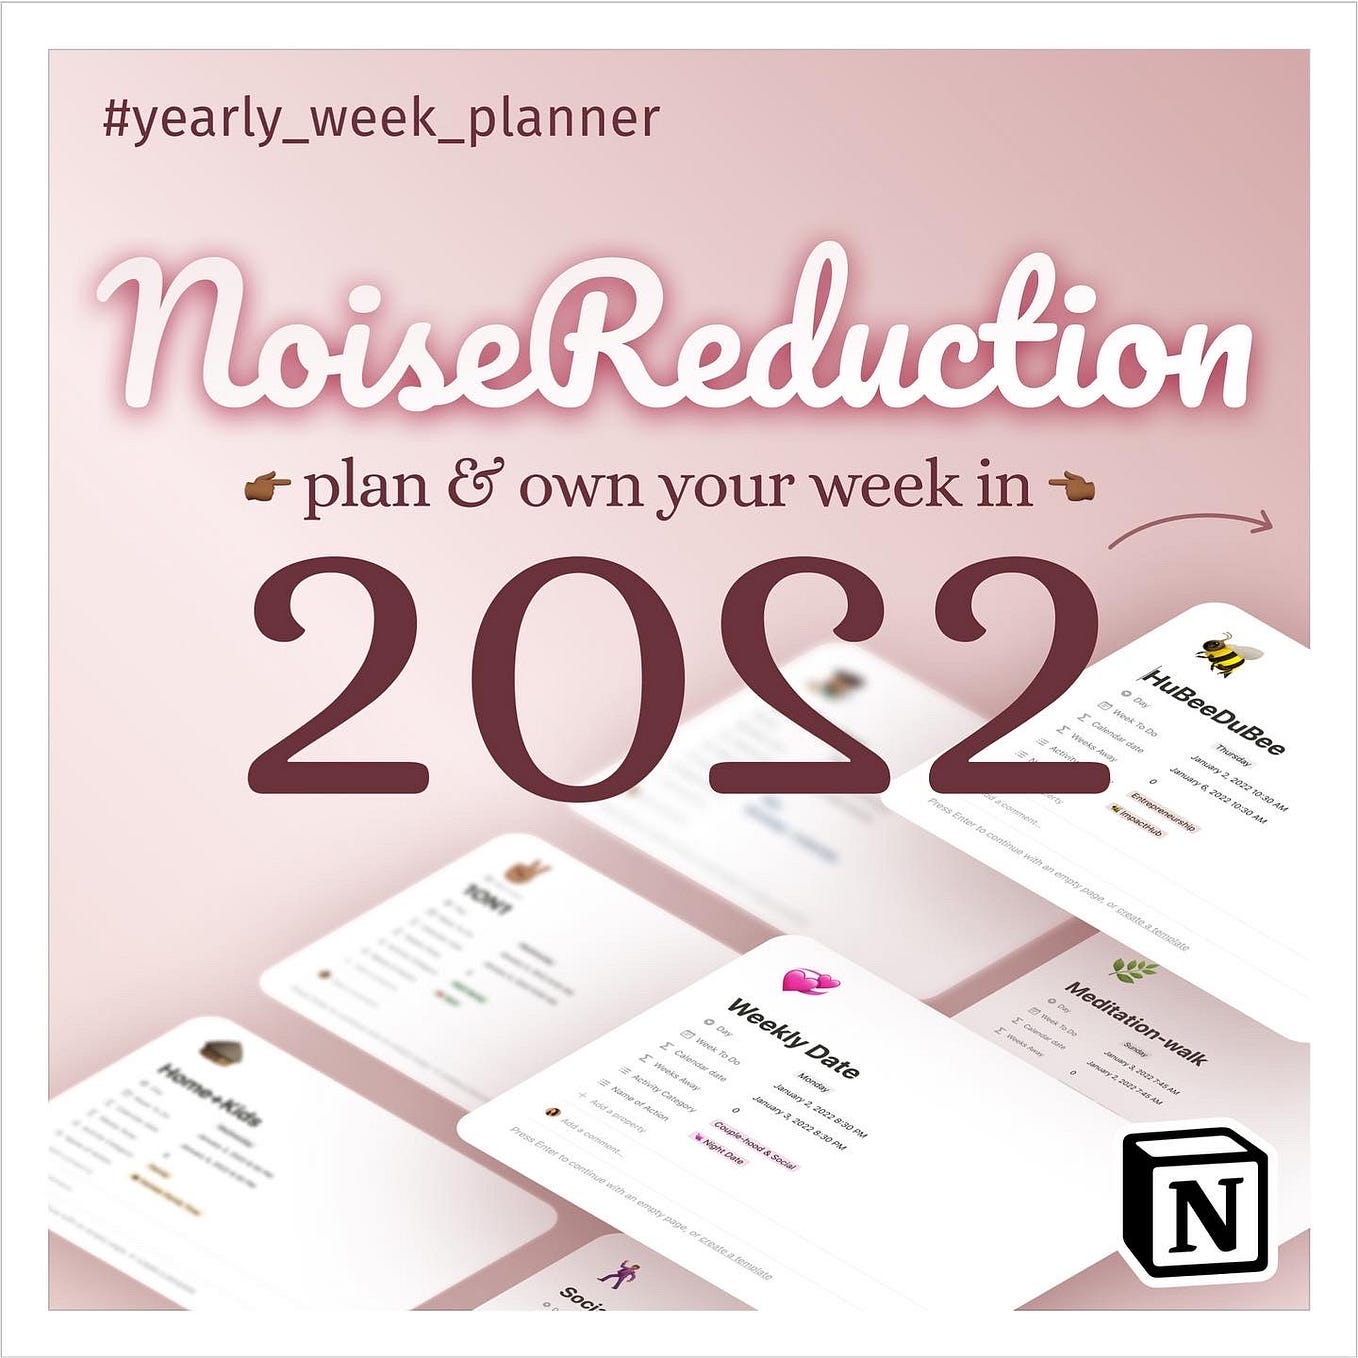 🐝 NOISE REDUCTION — Plan & own your week in ✌🏾👊🏾✌🏾✌🏾